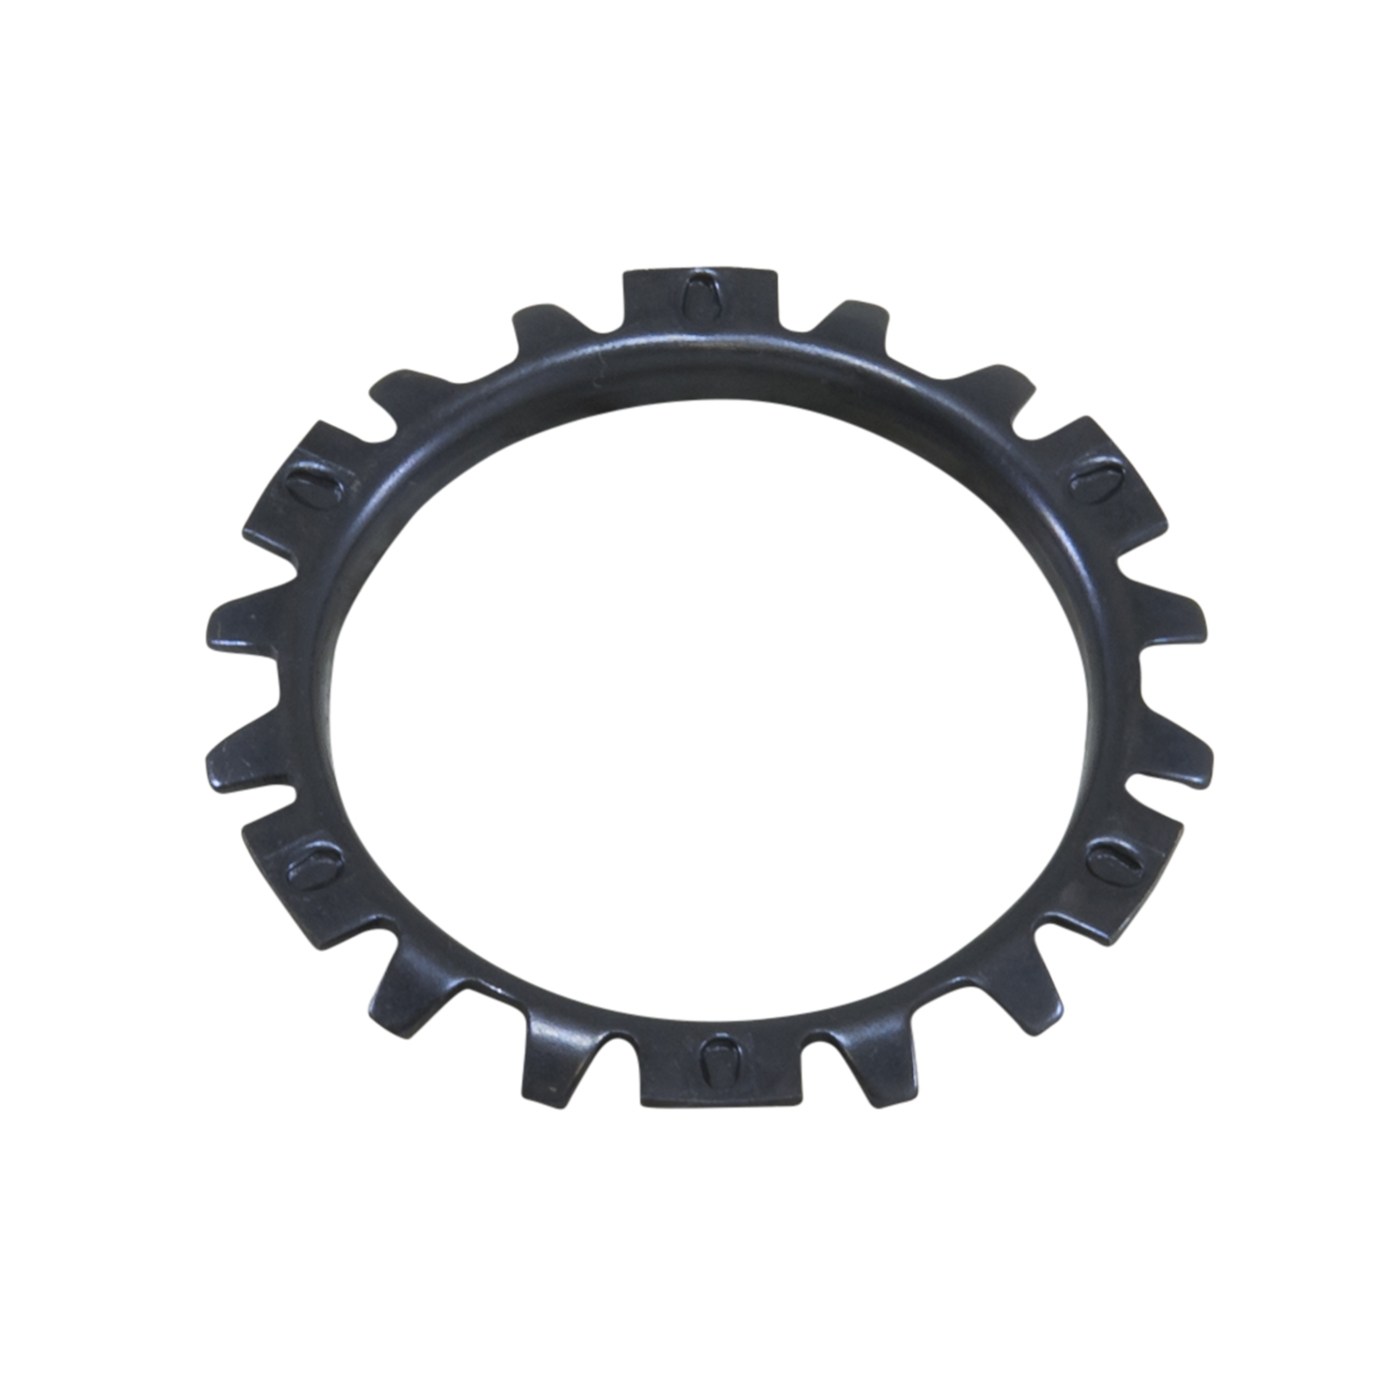 Pilot Bearing retainer for Ford 9". 